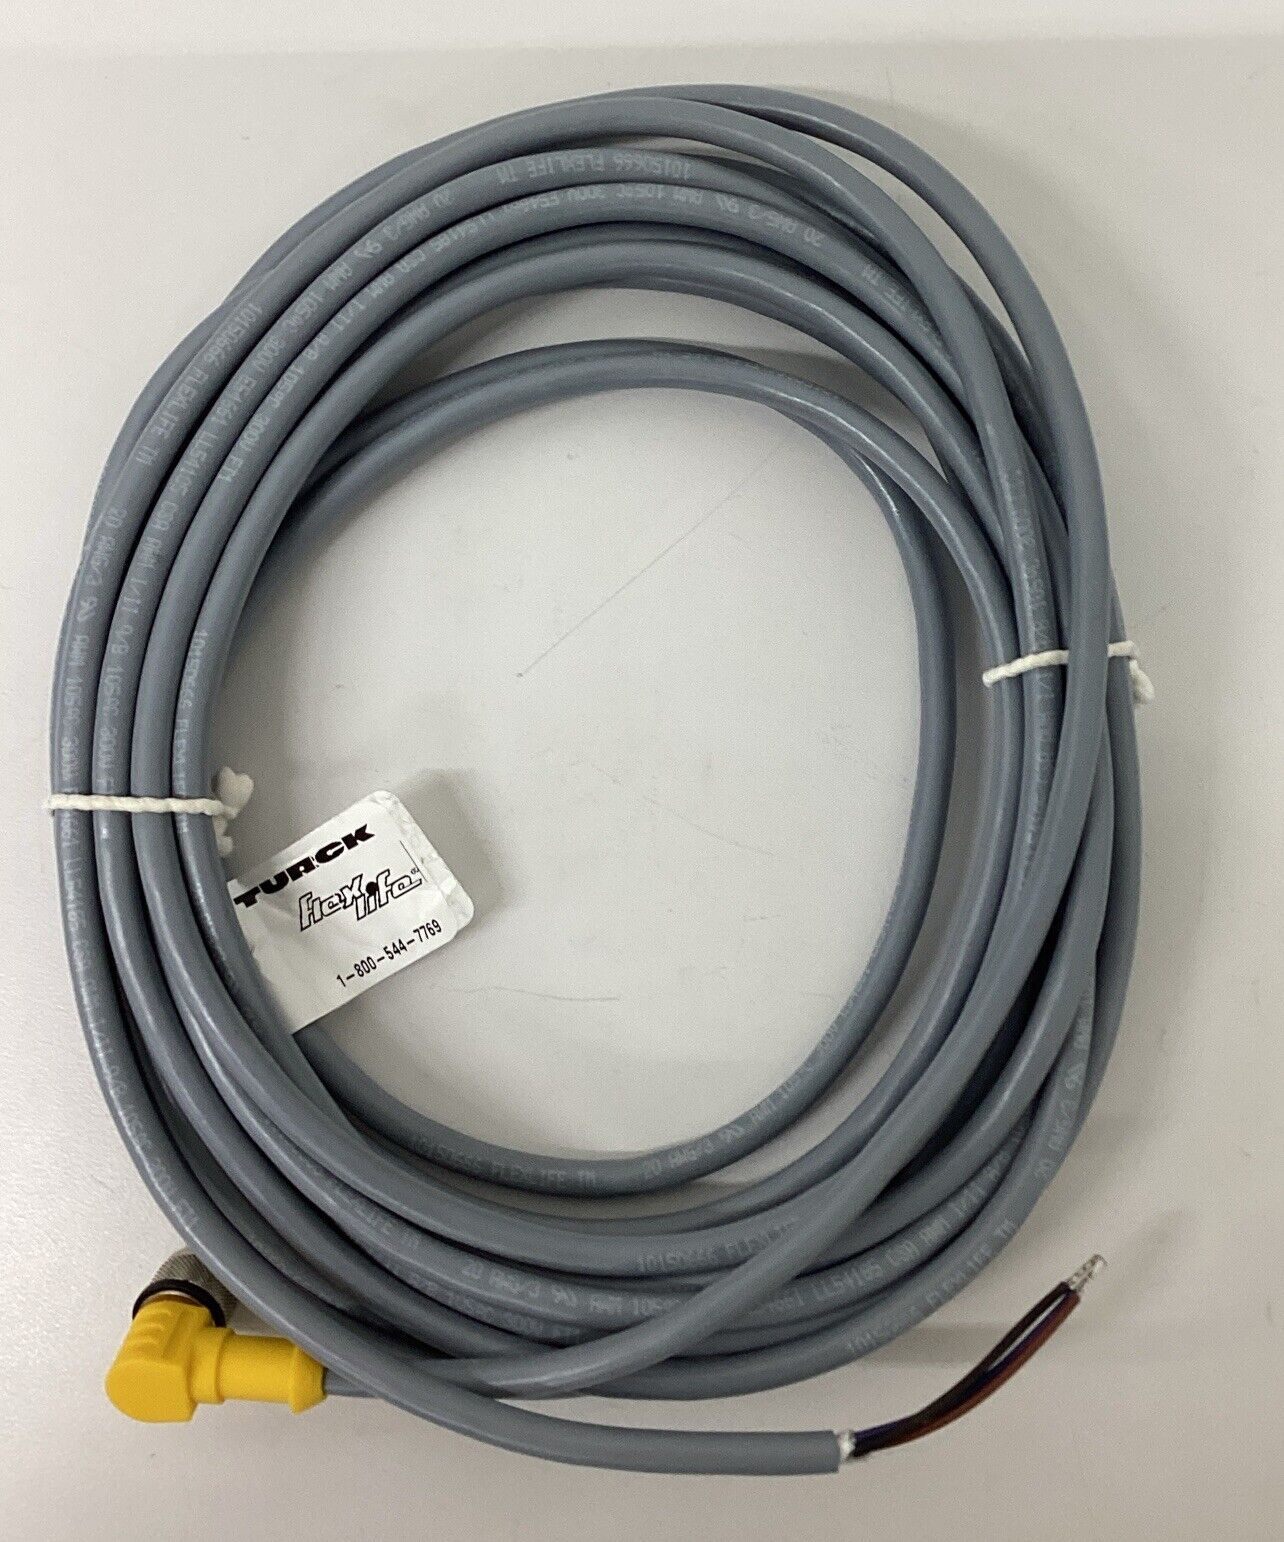 Turck WK4T-6/S101 M12 , 90 Degree Female Single End Cable 3-Wire 6M (RE146)